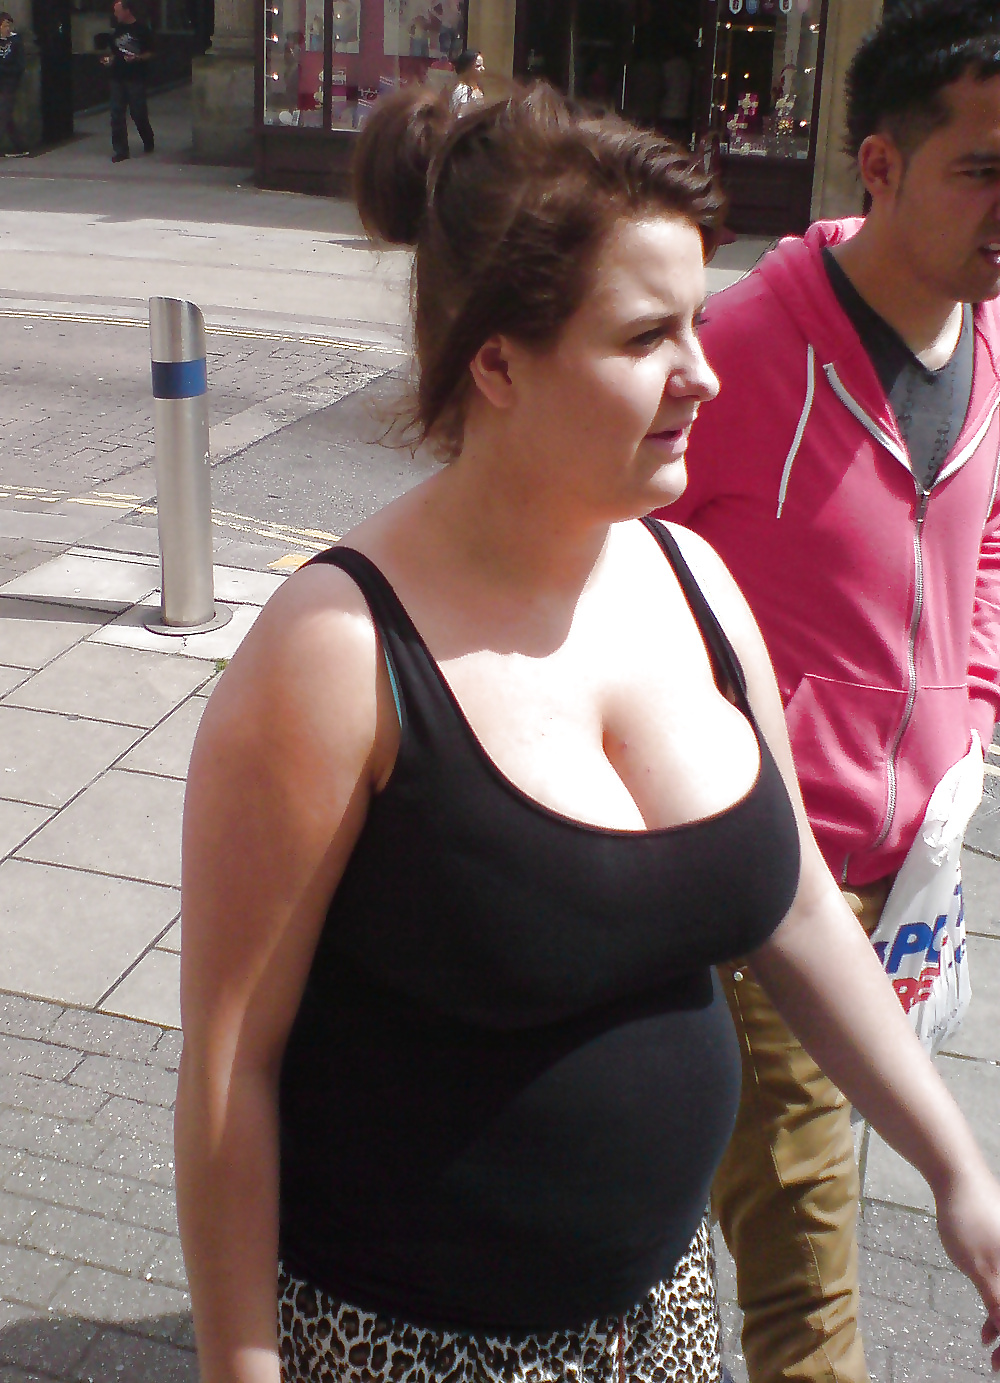 XXX Sexy Cleavage on street (busty girl candid mix) 01